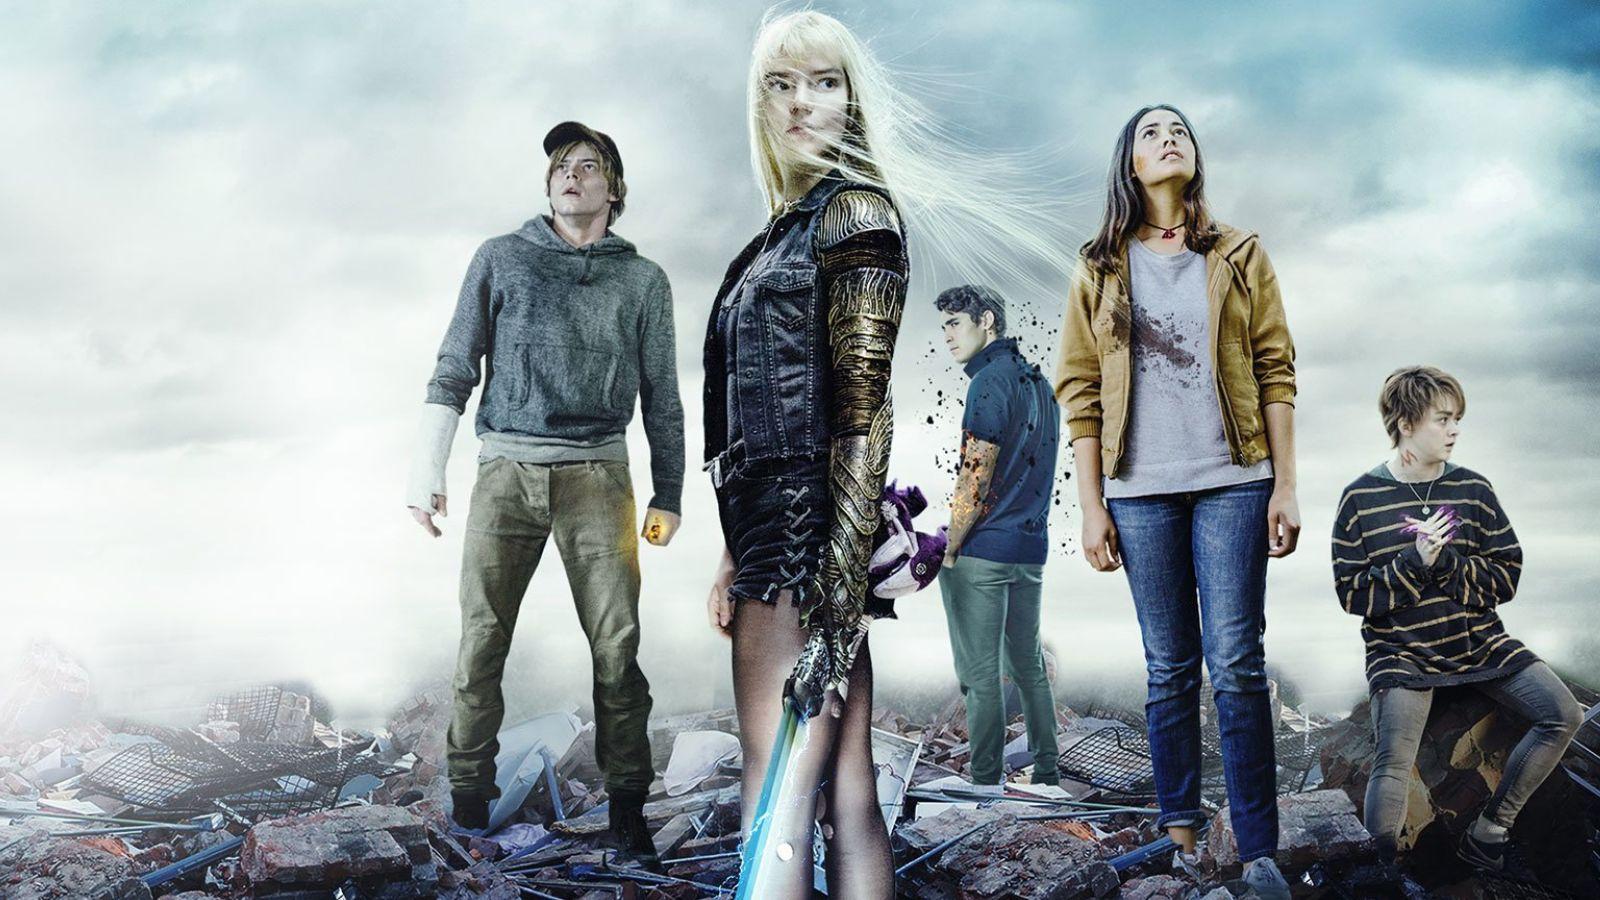 The New Mutants cast in an official poster.